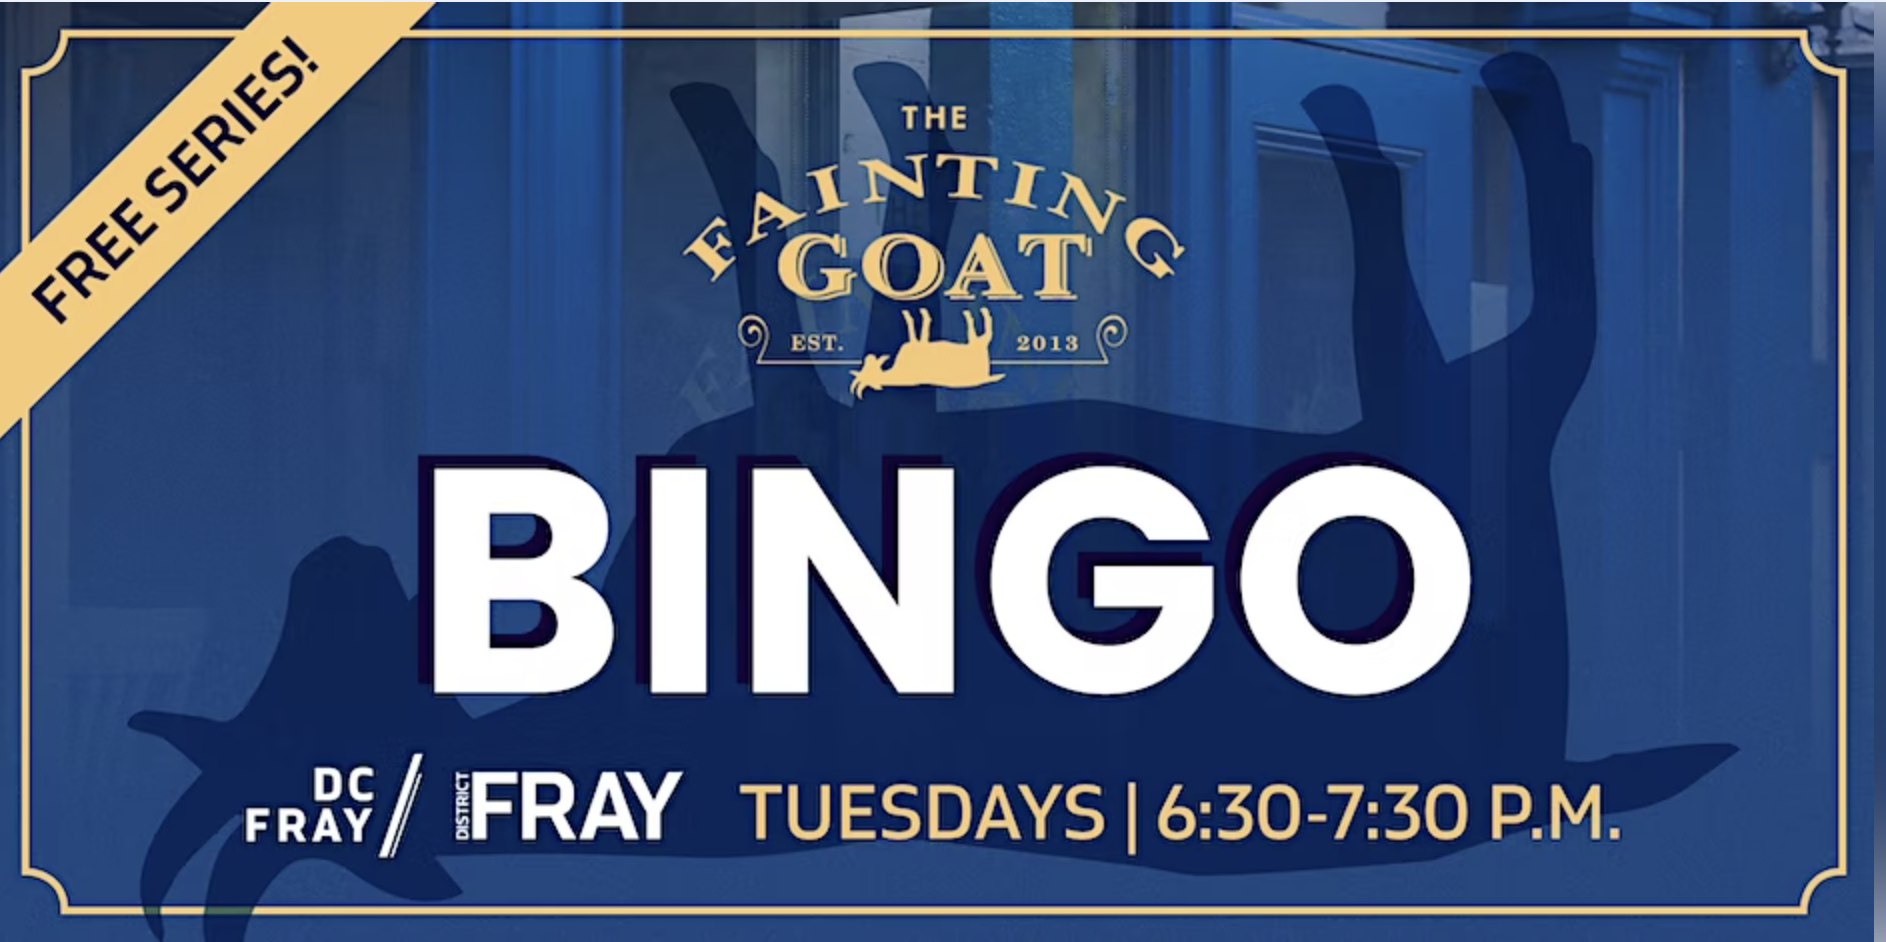 Free Weekly Bingo Series at The Fainting Goat